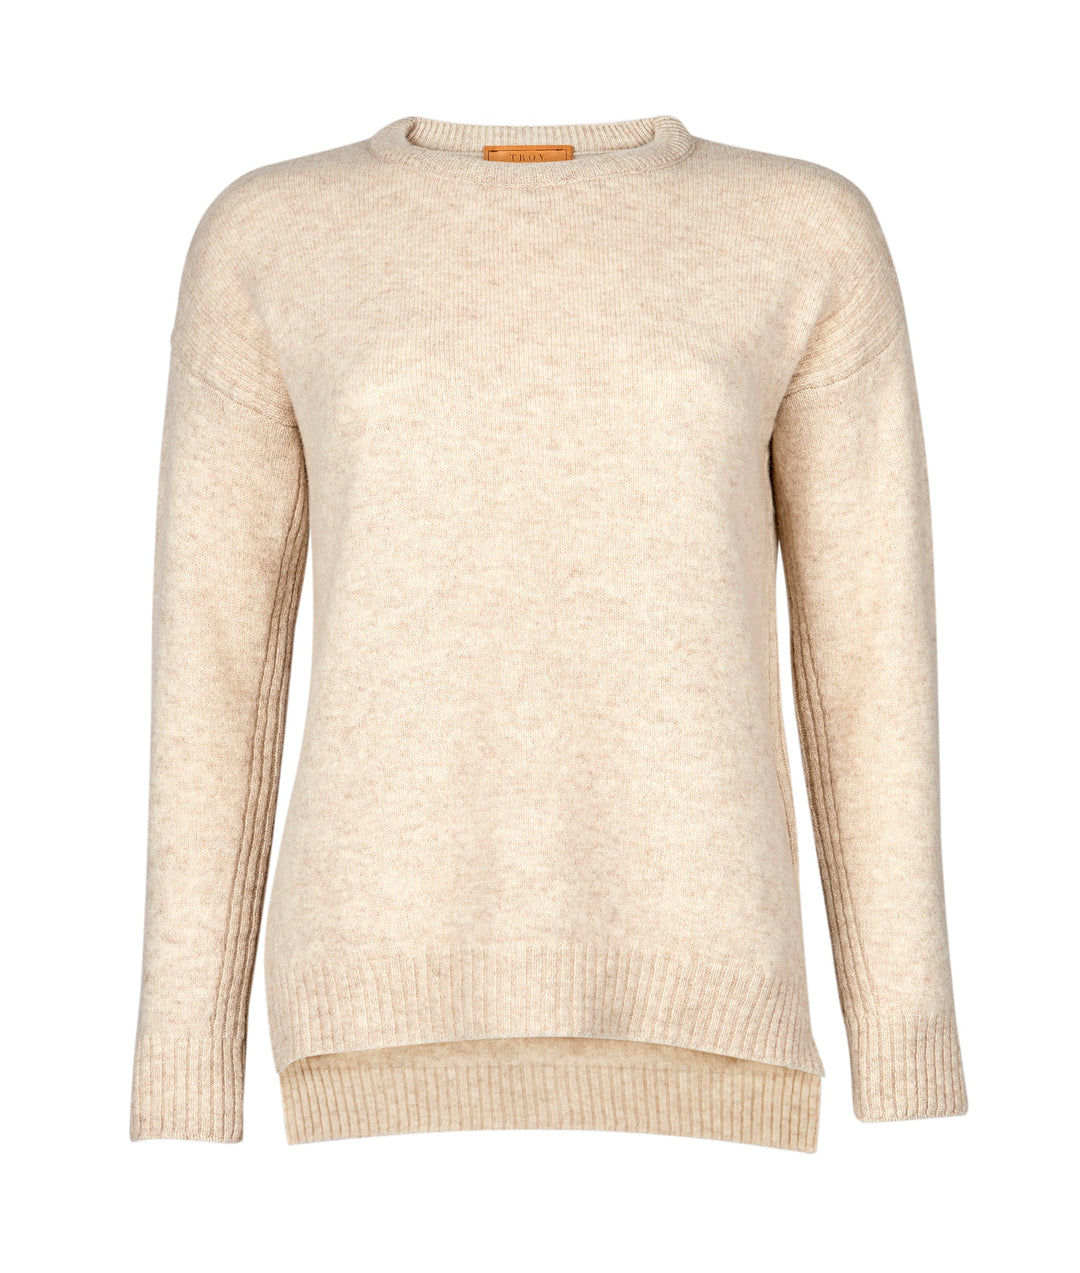 A luxuriously soft British-spun lambswool jumper has a relaxed fit, drop shoulder ribbed detail and features a mix of dyed and undyed yarn, bringing out a beautiful marled effect.